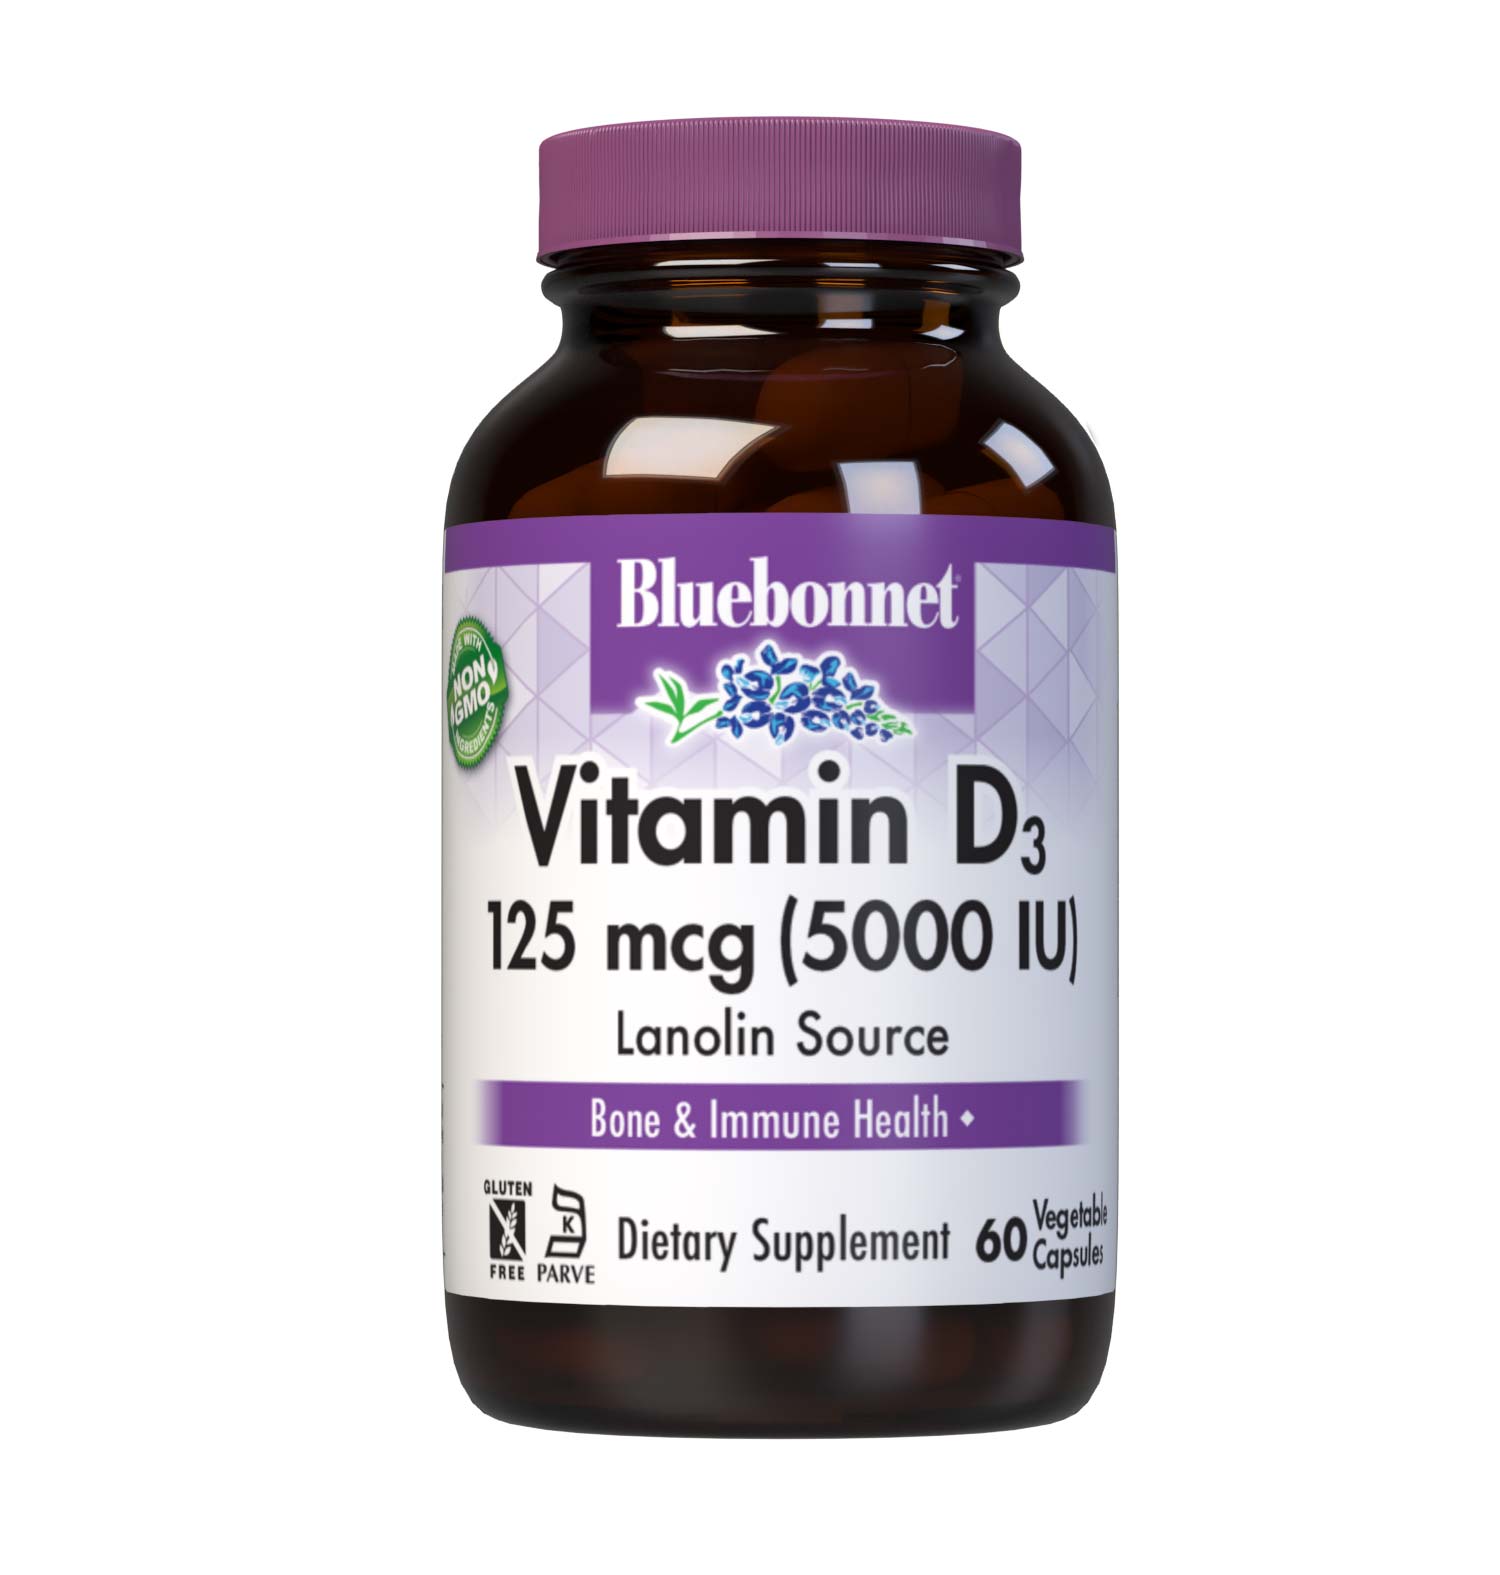 Bluebonnet’s Vitamin D3 5000 IU (125 mcg) 60 vegetable capsules are formulated with vitamin D3 (cholecalciferol) from lanolin that supports strong bones and immune function. #size_60 count